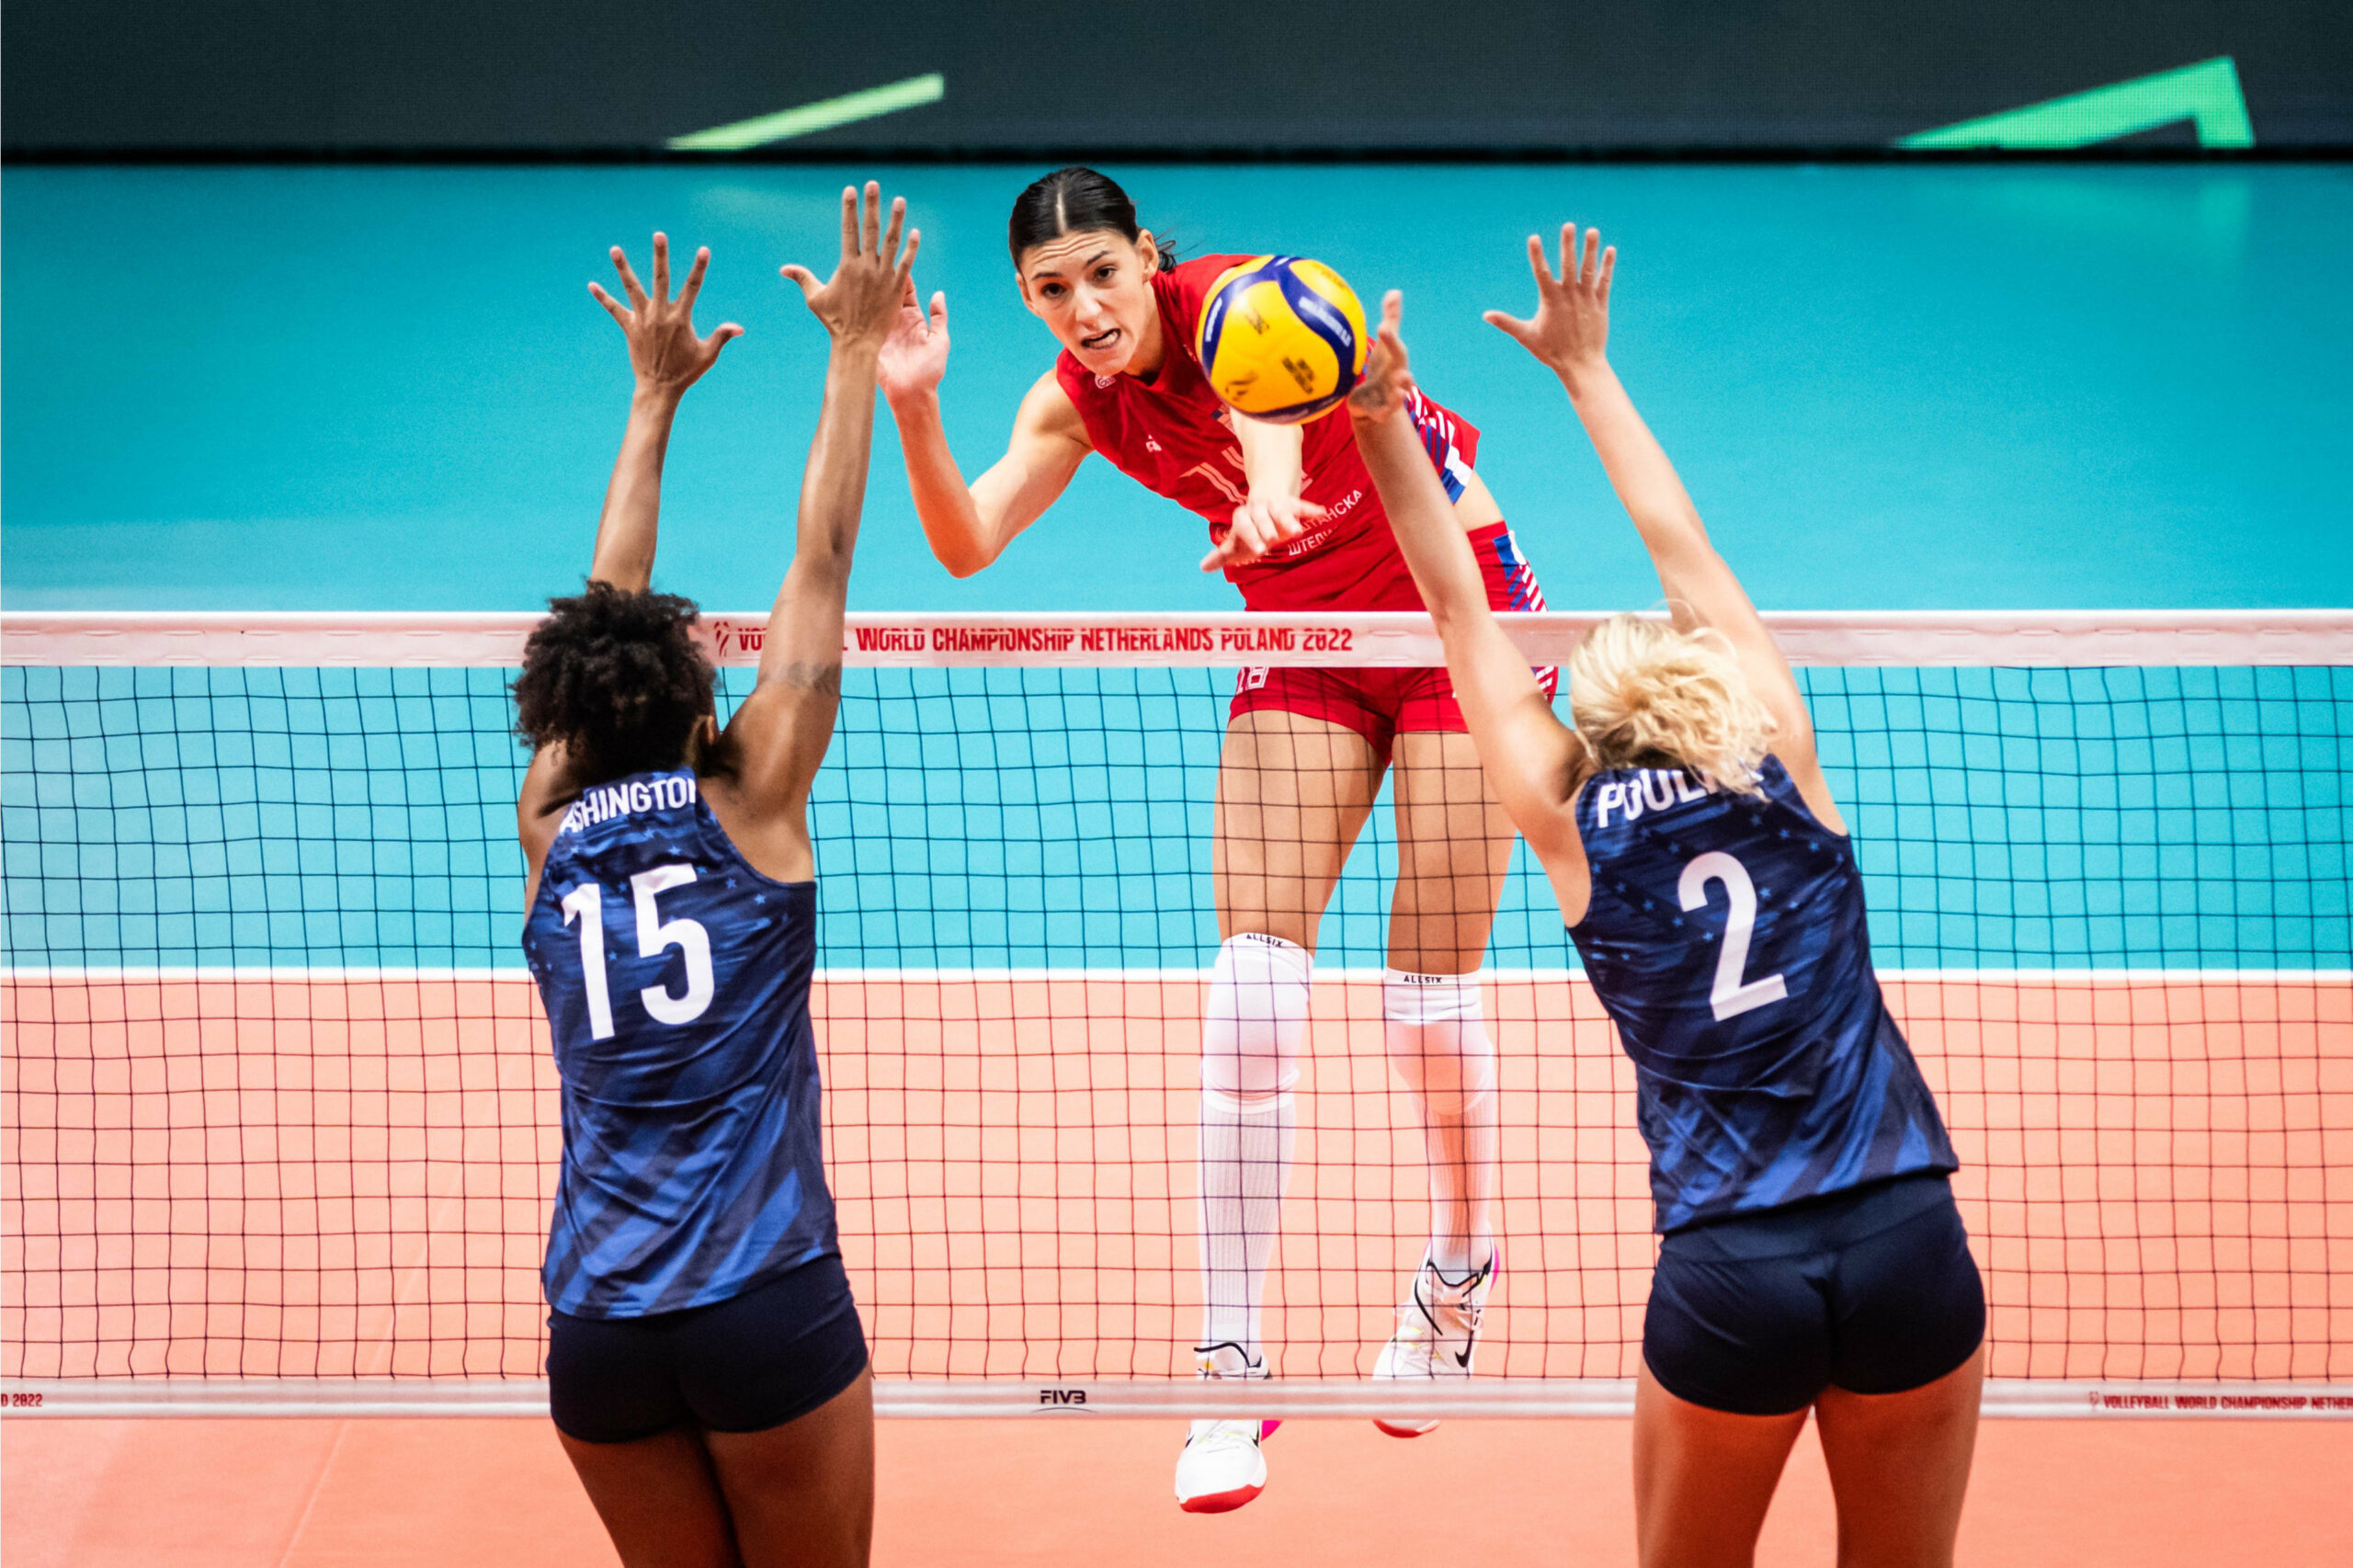 Boskovic leads Serbia to another gold medal match